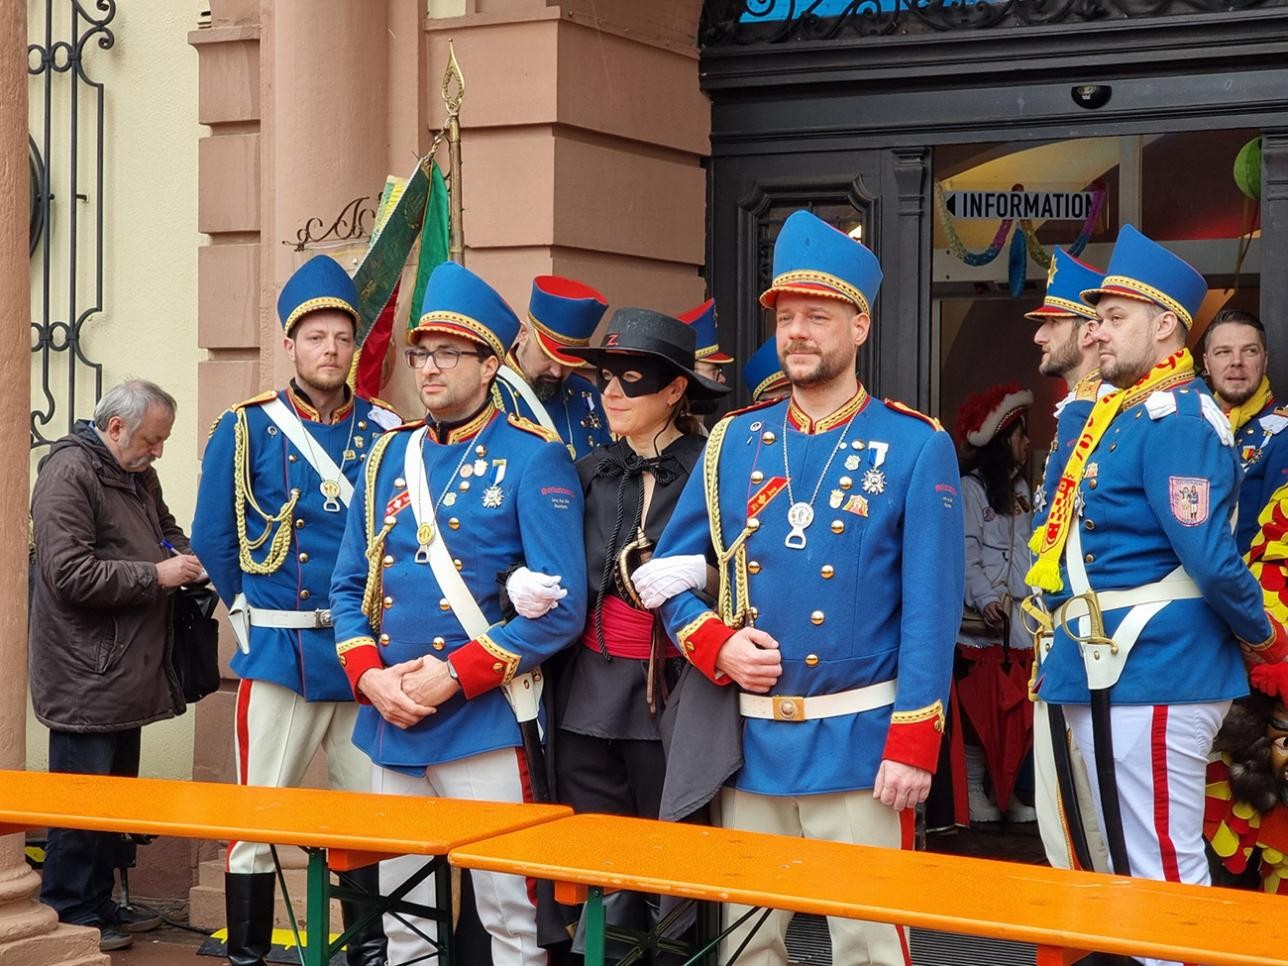 Mayor Müller with the castle guard in front of the town hall